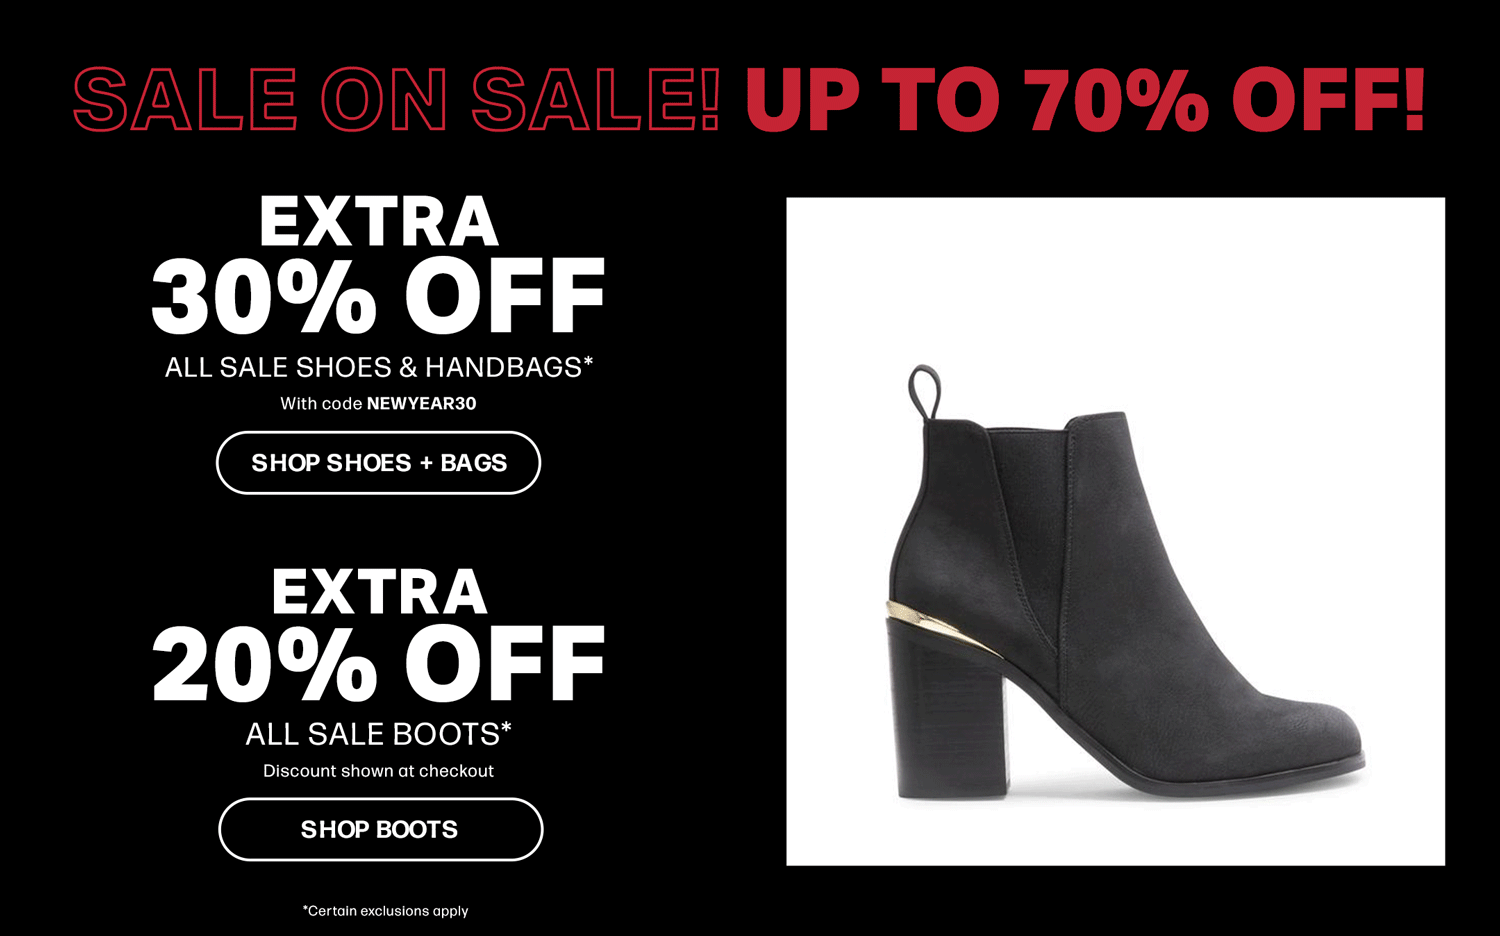 Steve Madden Canada Sale On Sale: Save Up to 70% off Sale + Extra 30% off Shoes & Handbags 